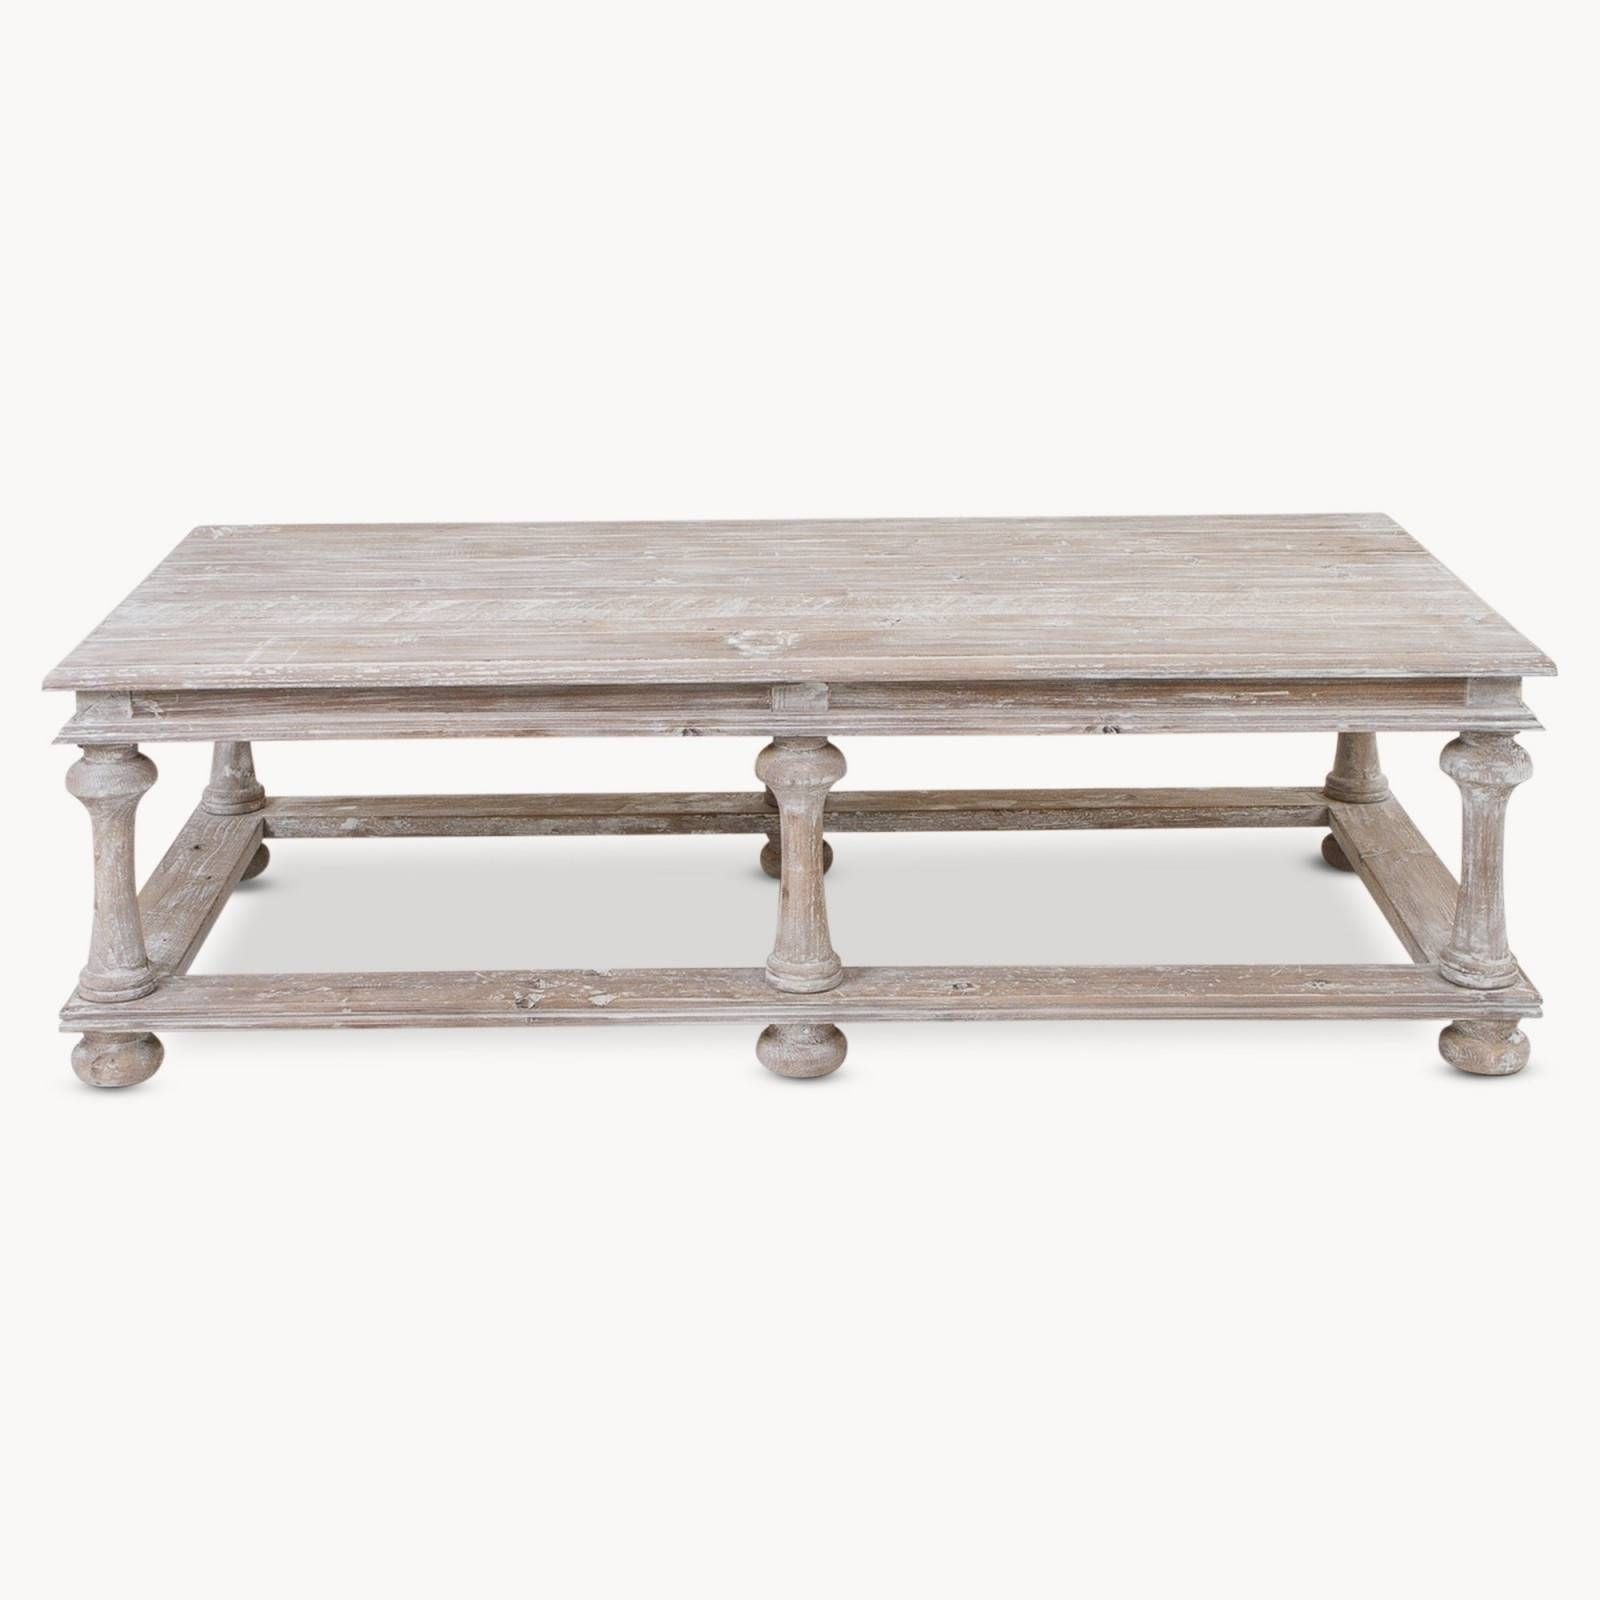 Coffee Table : Impressive Grey Wash Coffee Table Gray Wood Coffee Intended For Gray Wash Coffee Tables (View 1 of 30)